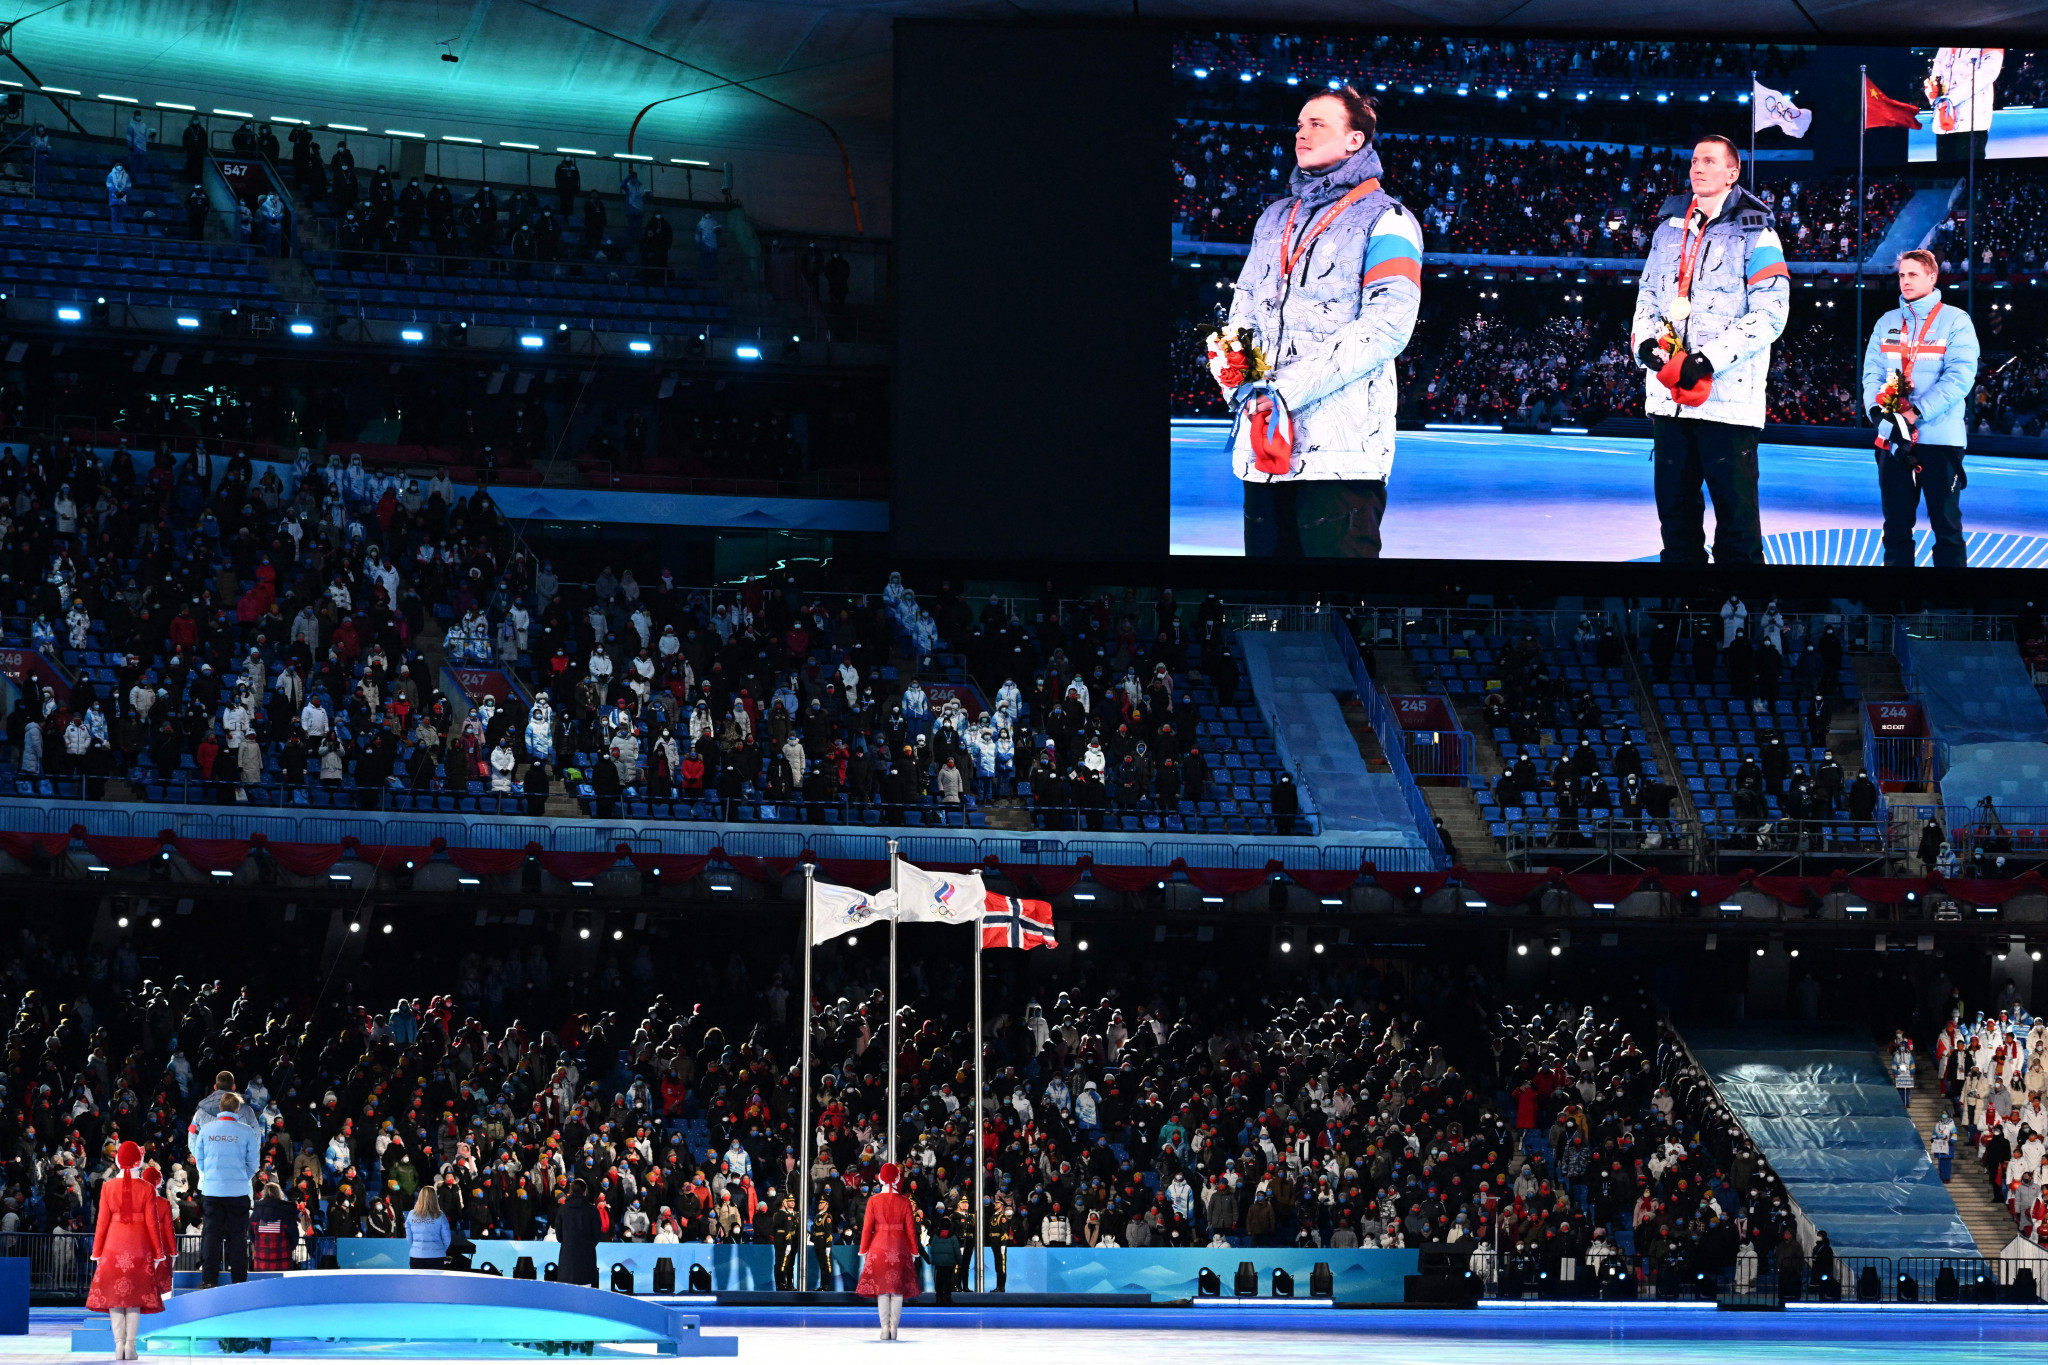 Alexander Bolshunov received the final gold medal of Beijing 2022 as the flag of the Russian Olympic Committee was raised at the Bird's Nest - a few days later his country invaded Ukraine, with him as one of the war's most high-profile supporters ©Getty Images